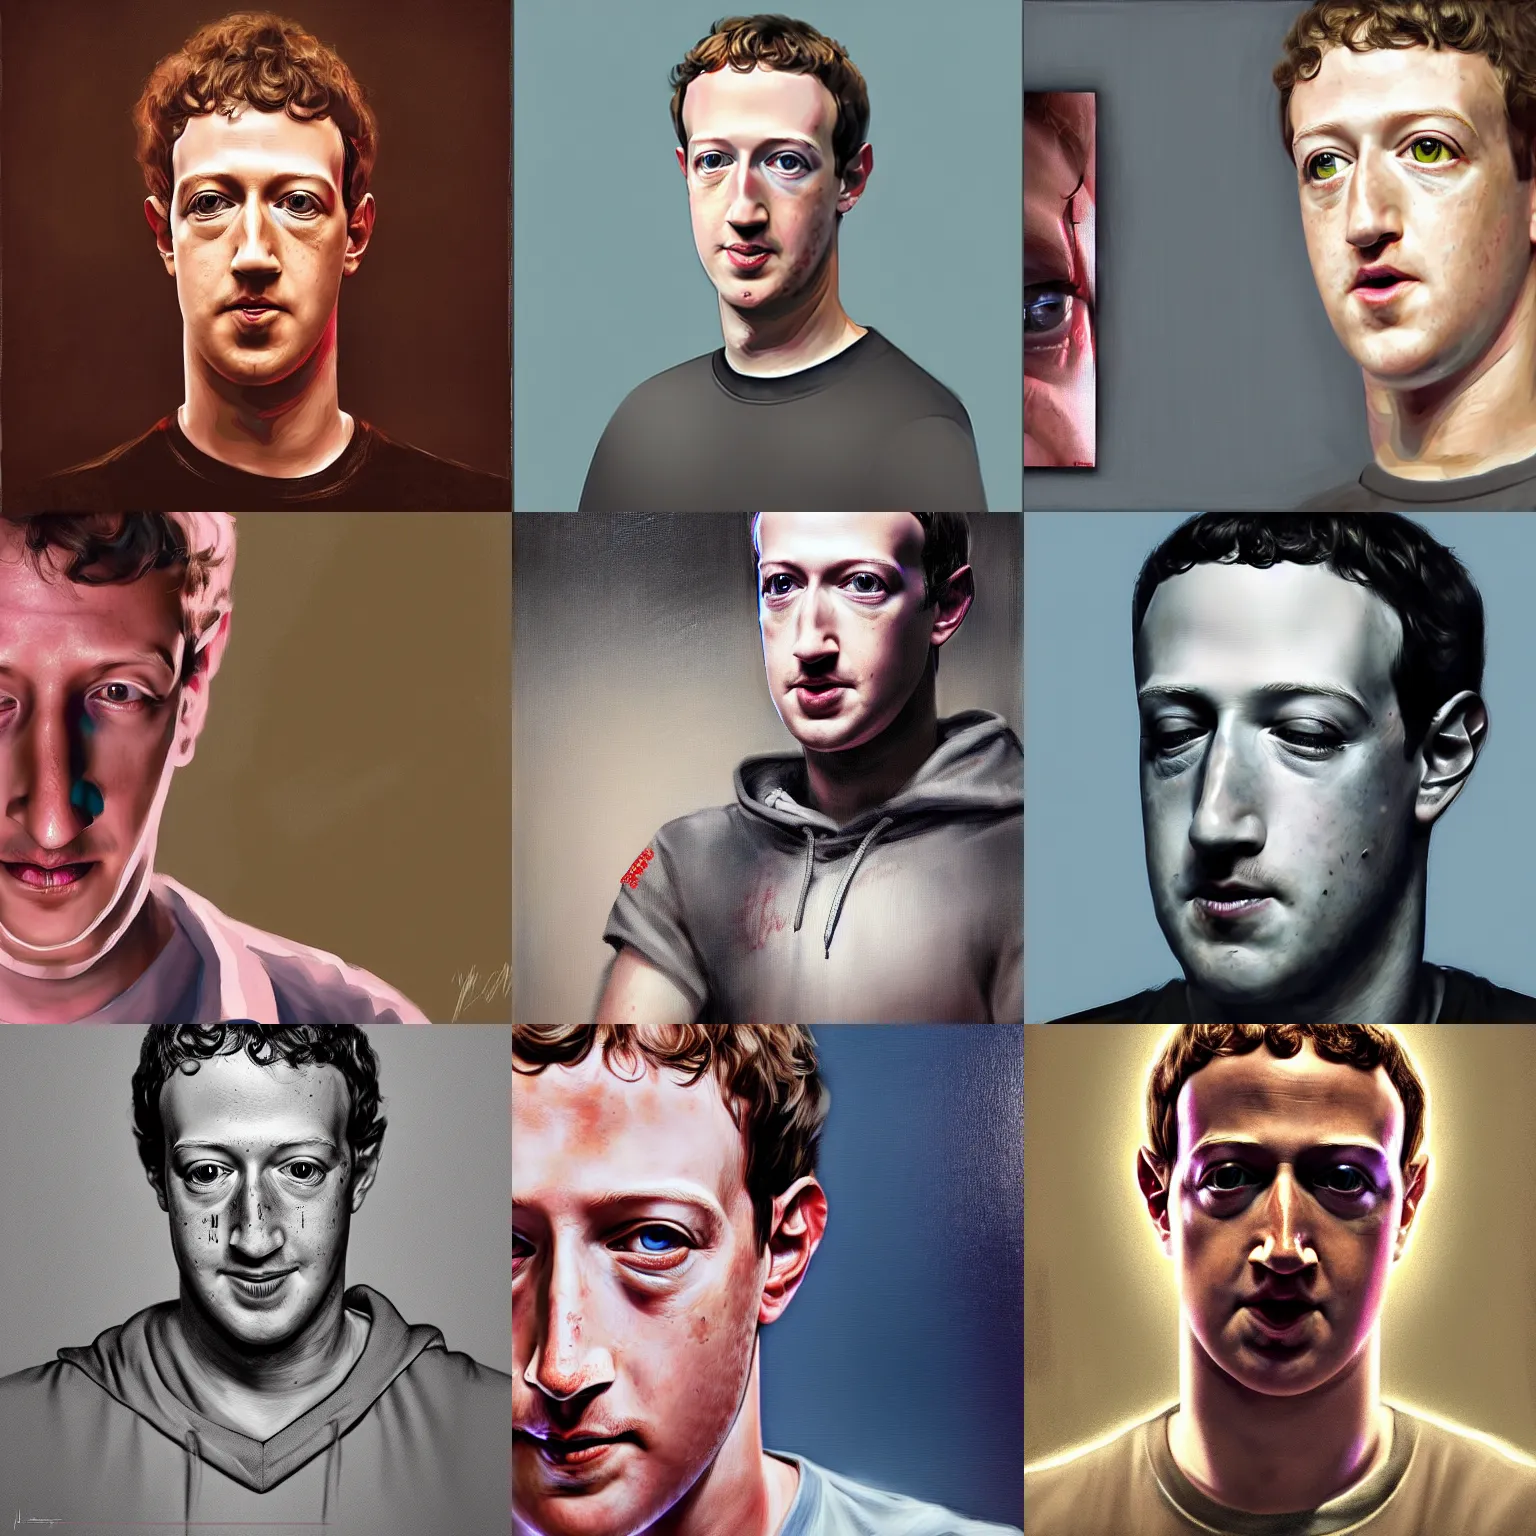 mark zuckerberg as the big brother watching you, | Stable Diffusion ...